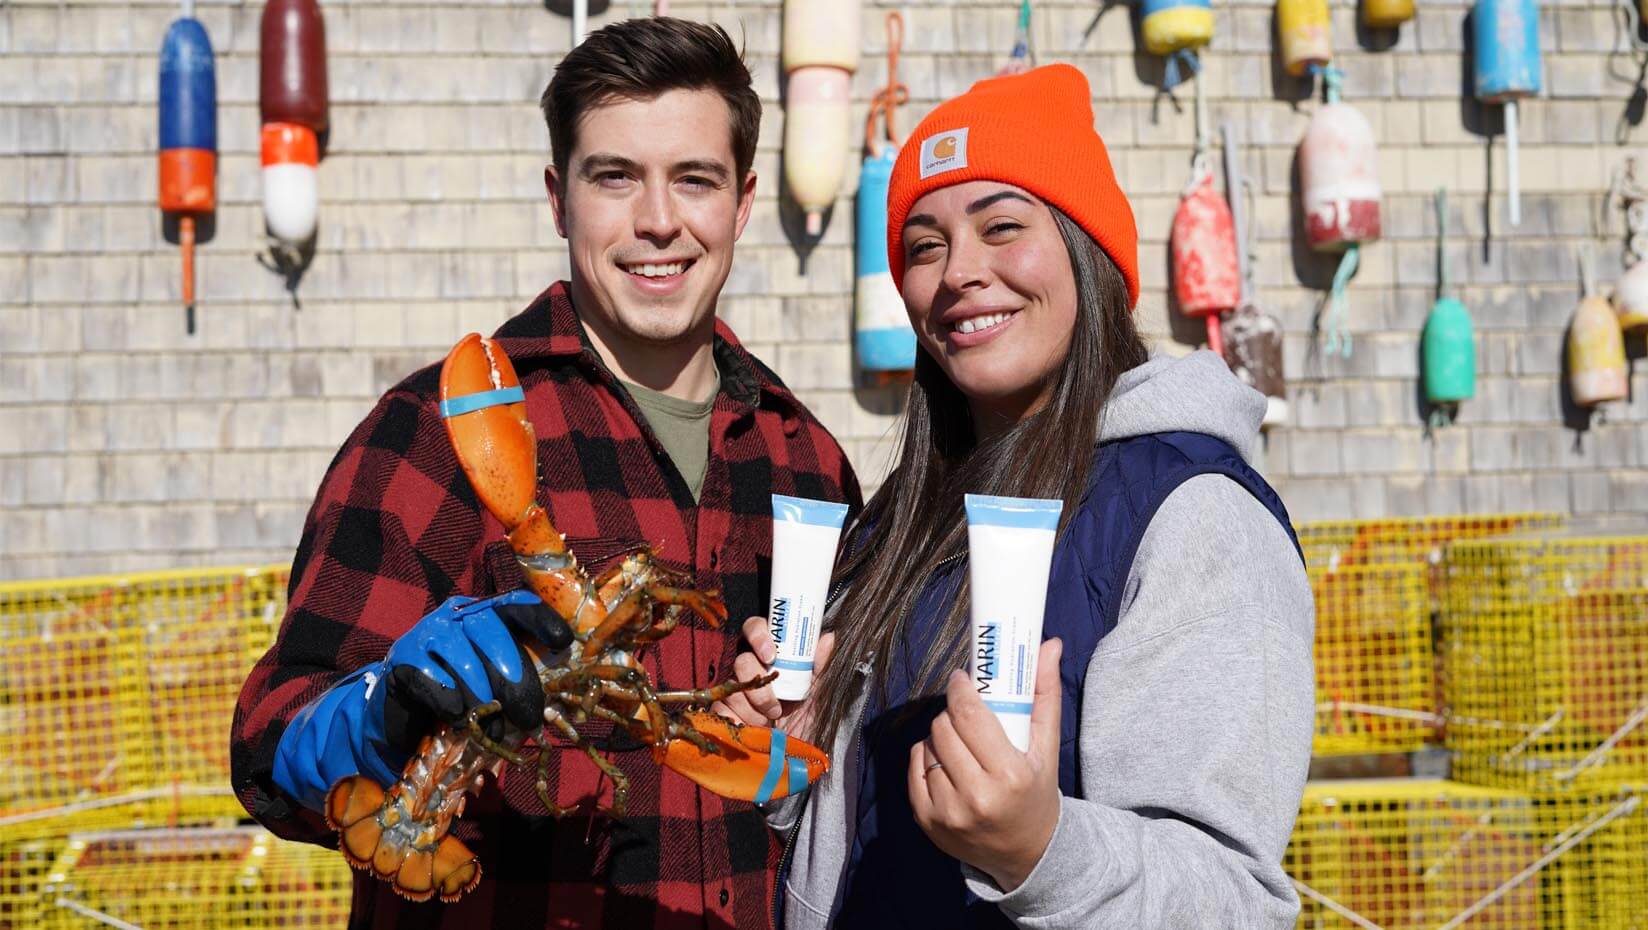 UMaine - Black Bear to Marin Skincare: Alumni founders adding value to Maine’s lobster industry